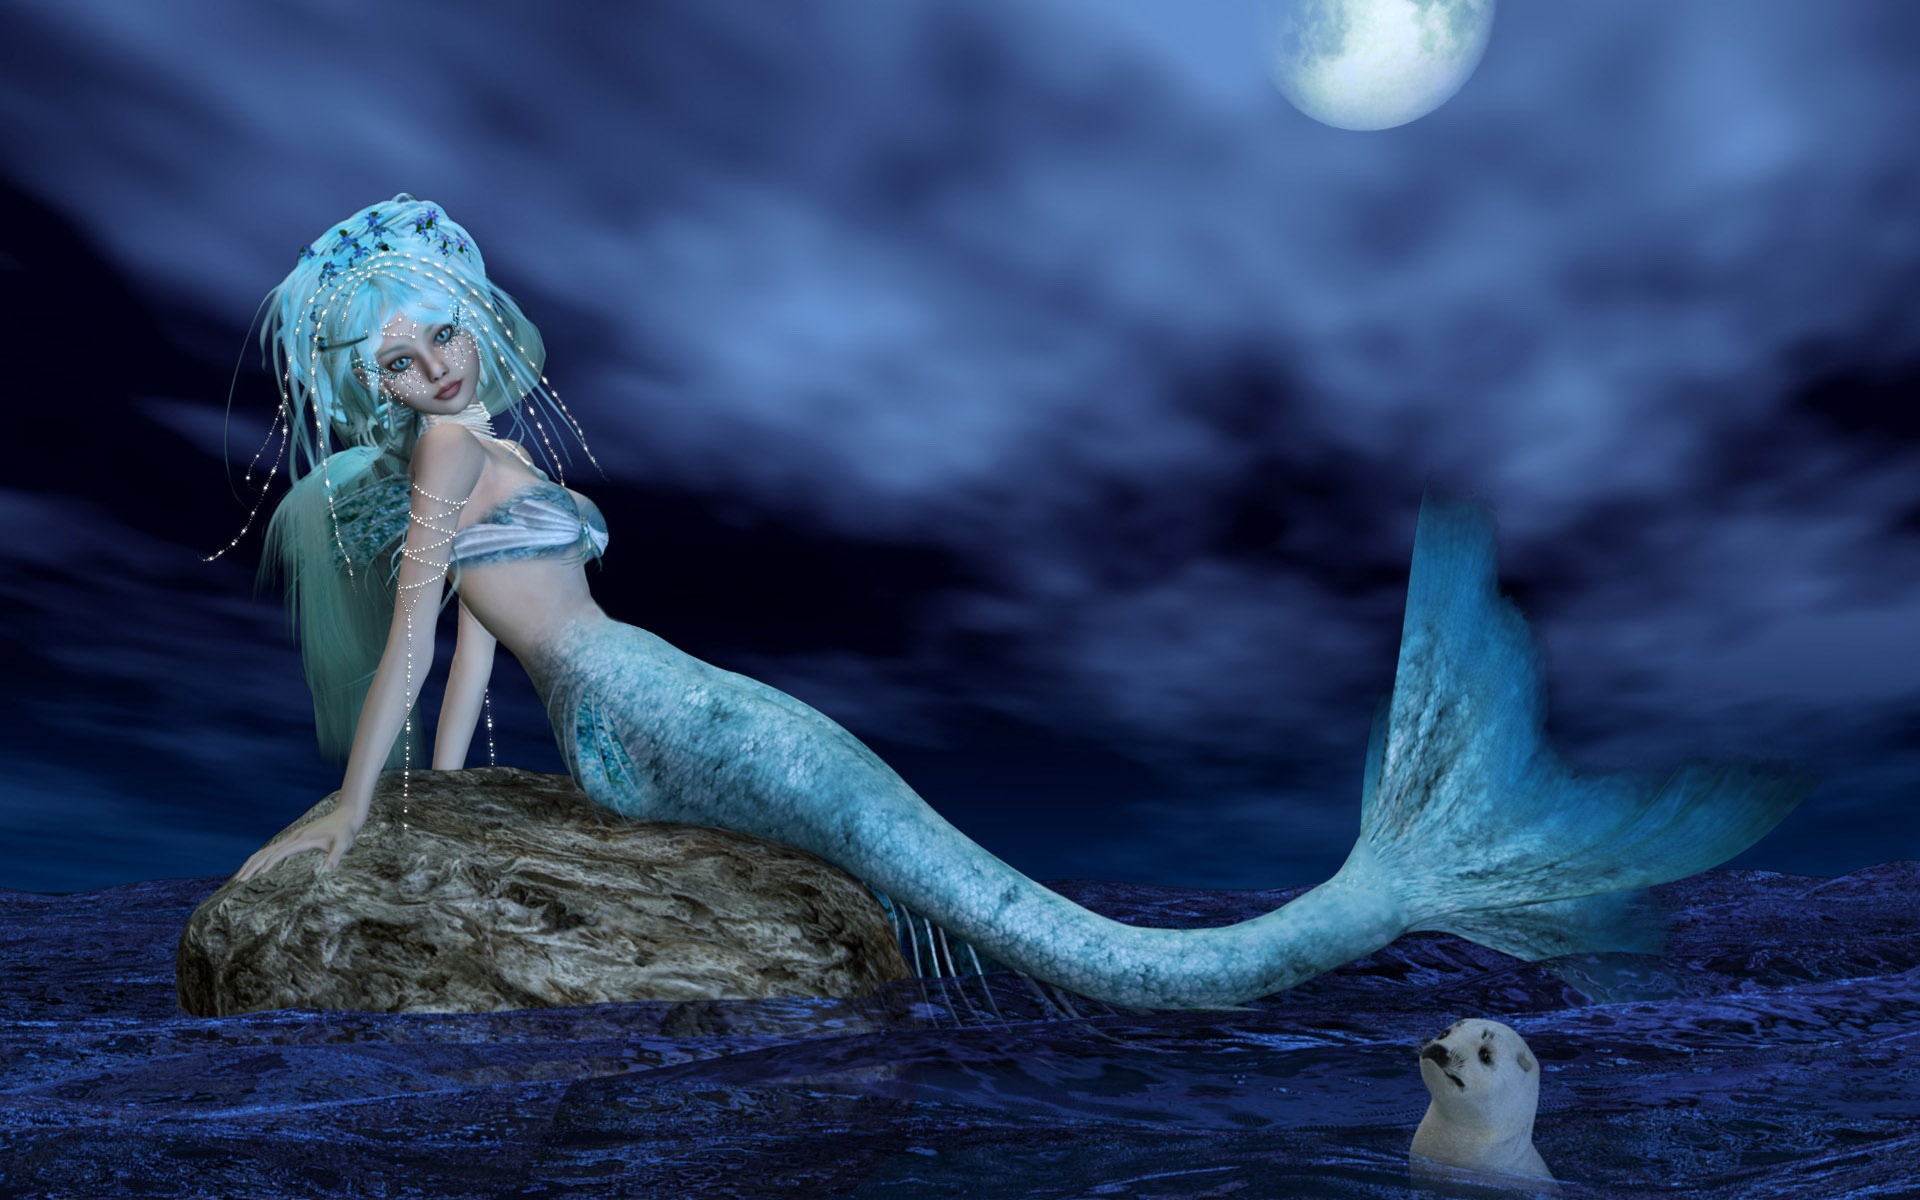 Real Mermaid Background Image Amp Pictures Becuo